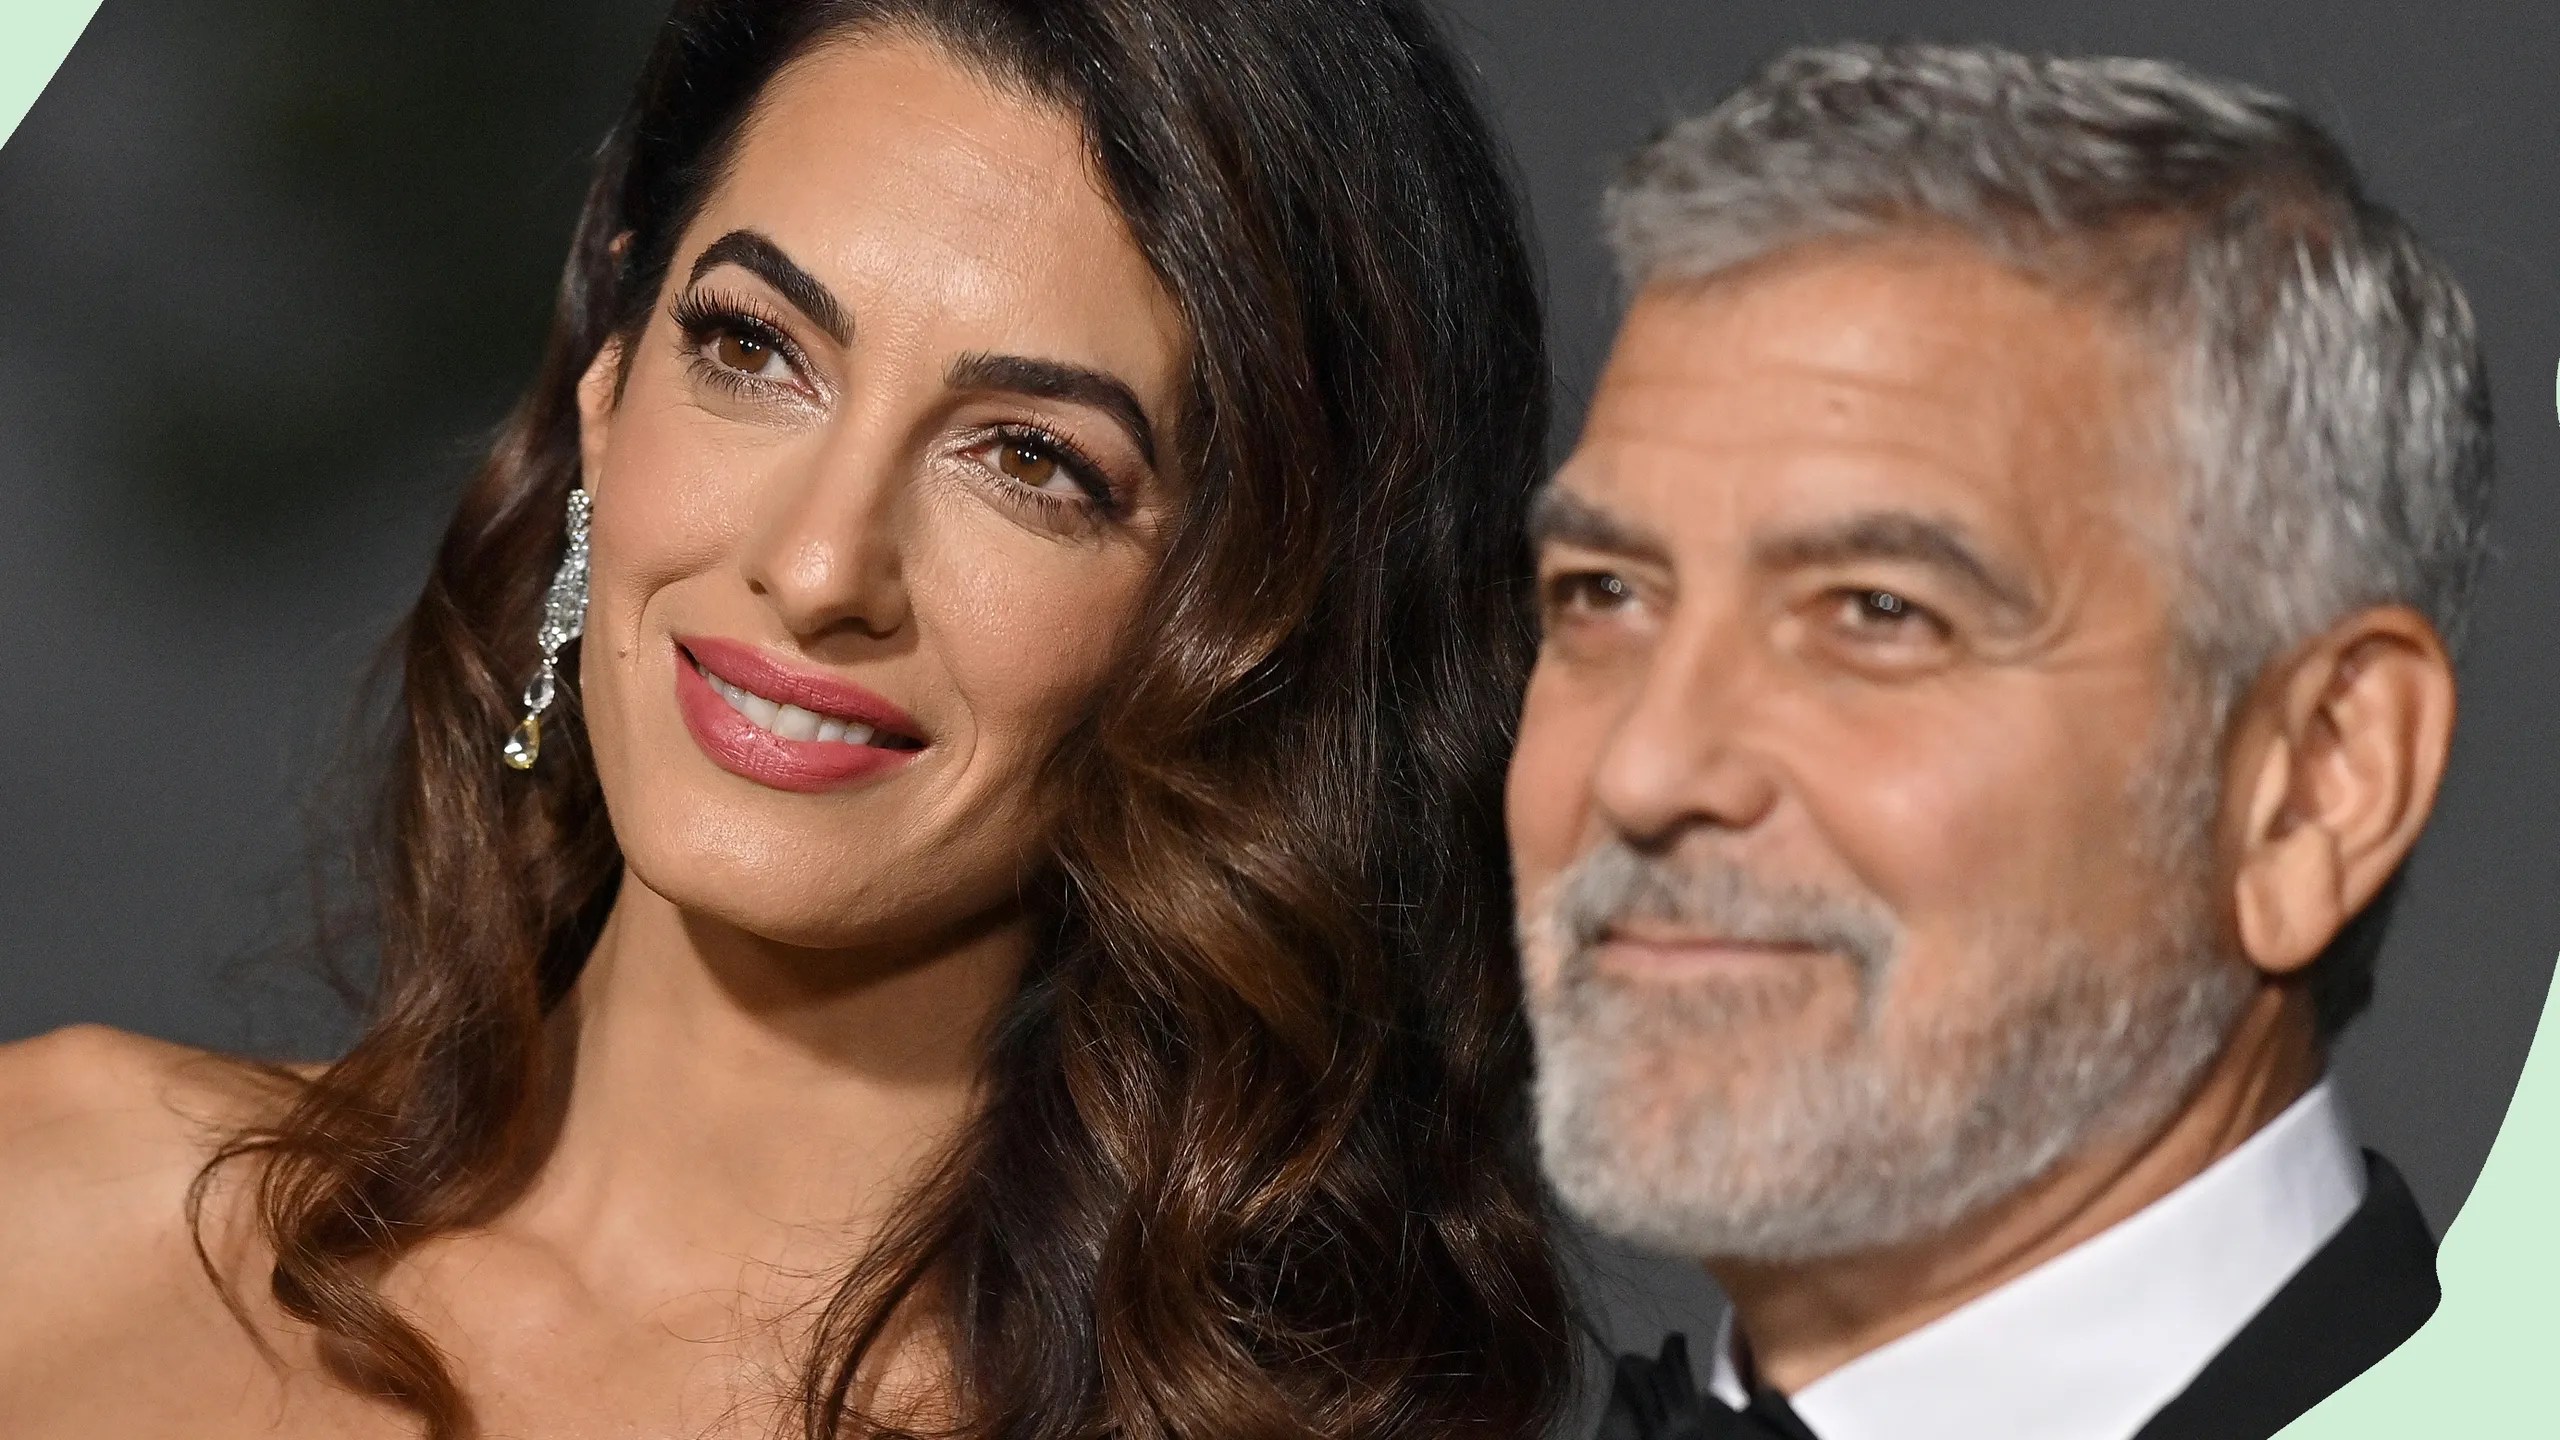 Clooney Describes Meeting Wife Amal On The Drew Barrymore Show